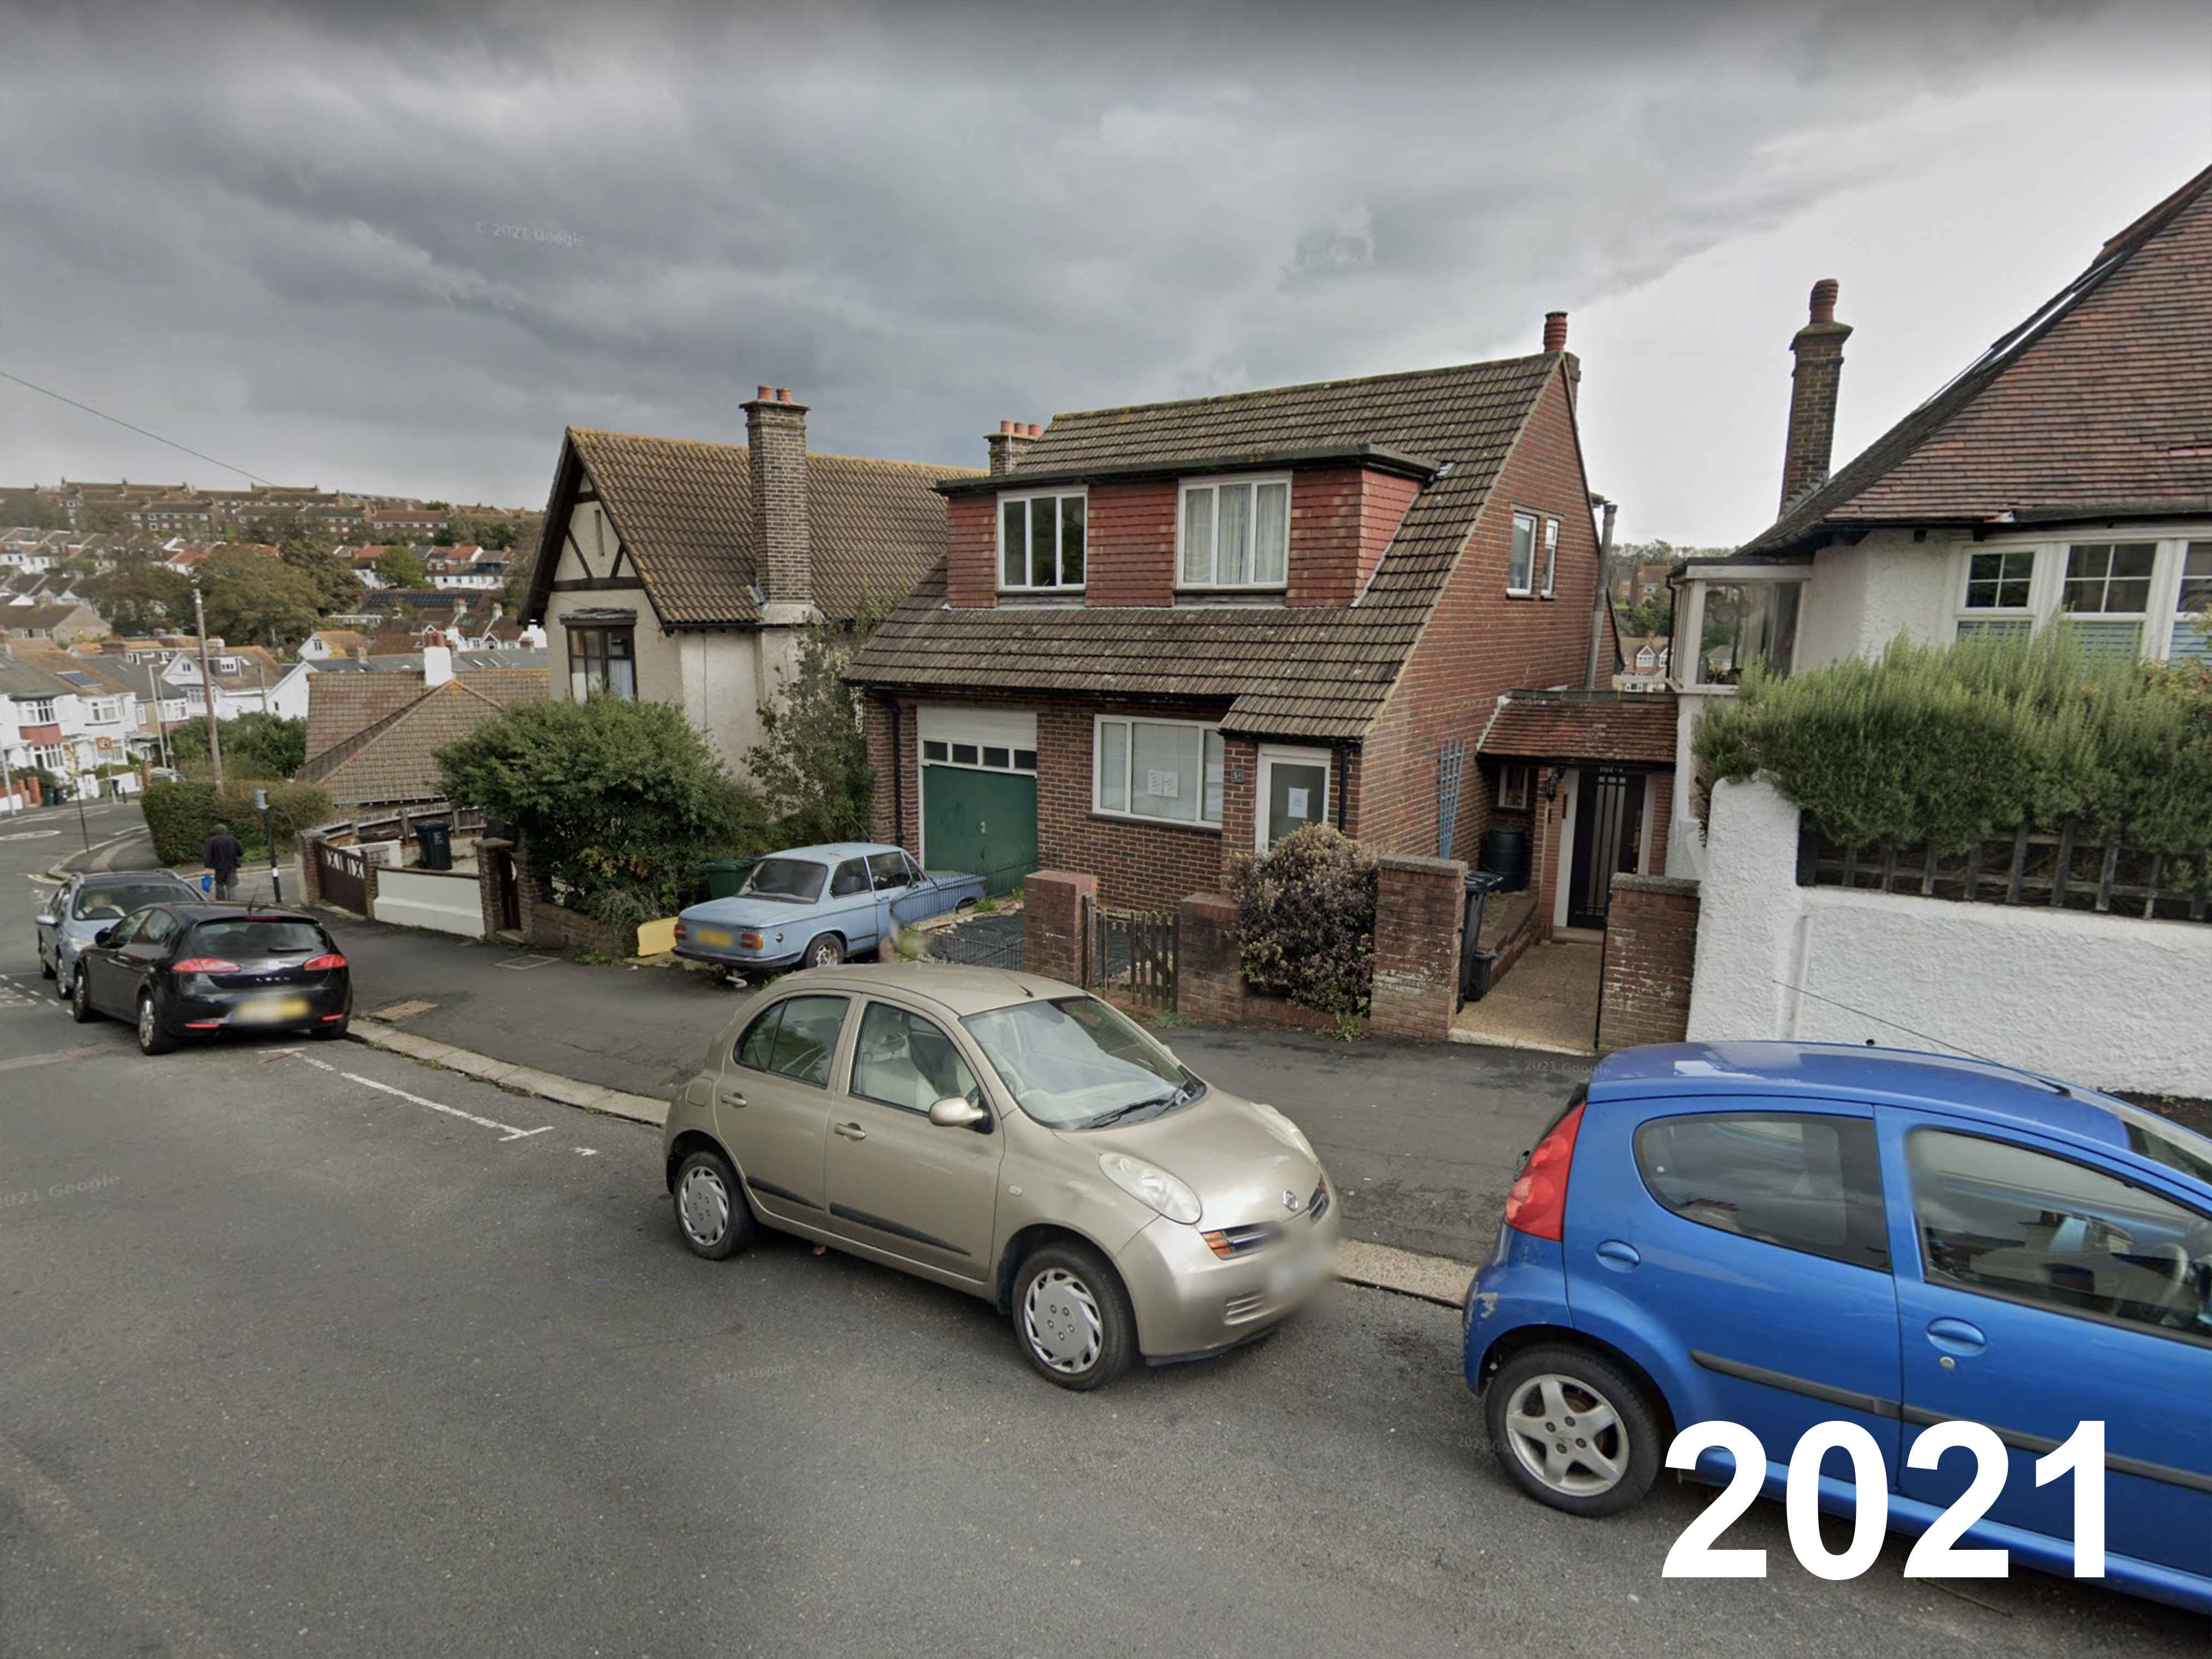 Photograph of LC03 FYJ - a Gold Nissan Micra parked in Hollingdean by a non-resident, and potentially abandoned. The thirteenth of seventeen photographs supplied by the residents of Hollingdean.